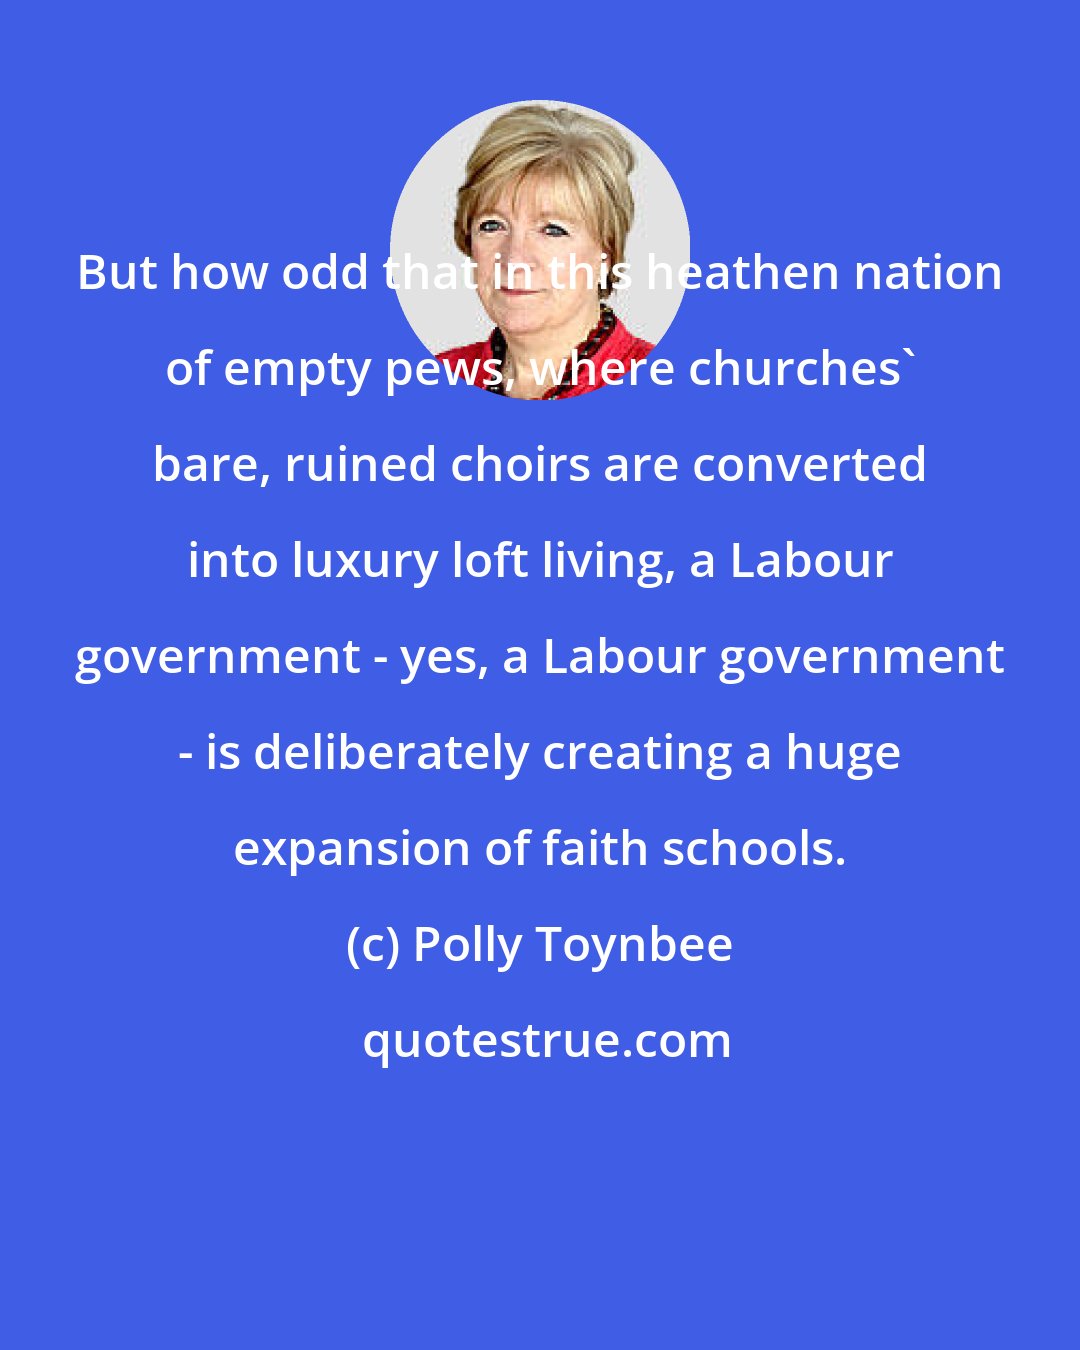 Polly Toynbee: But how odd that in this heathen nation of empty pews, where churches' bare, ruined choirs are converted into luxury loft living, a Labour government - yes, a Labour government - is deliberately creating a huge expansion of faith schools.